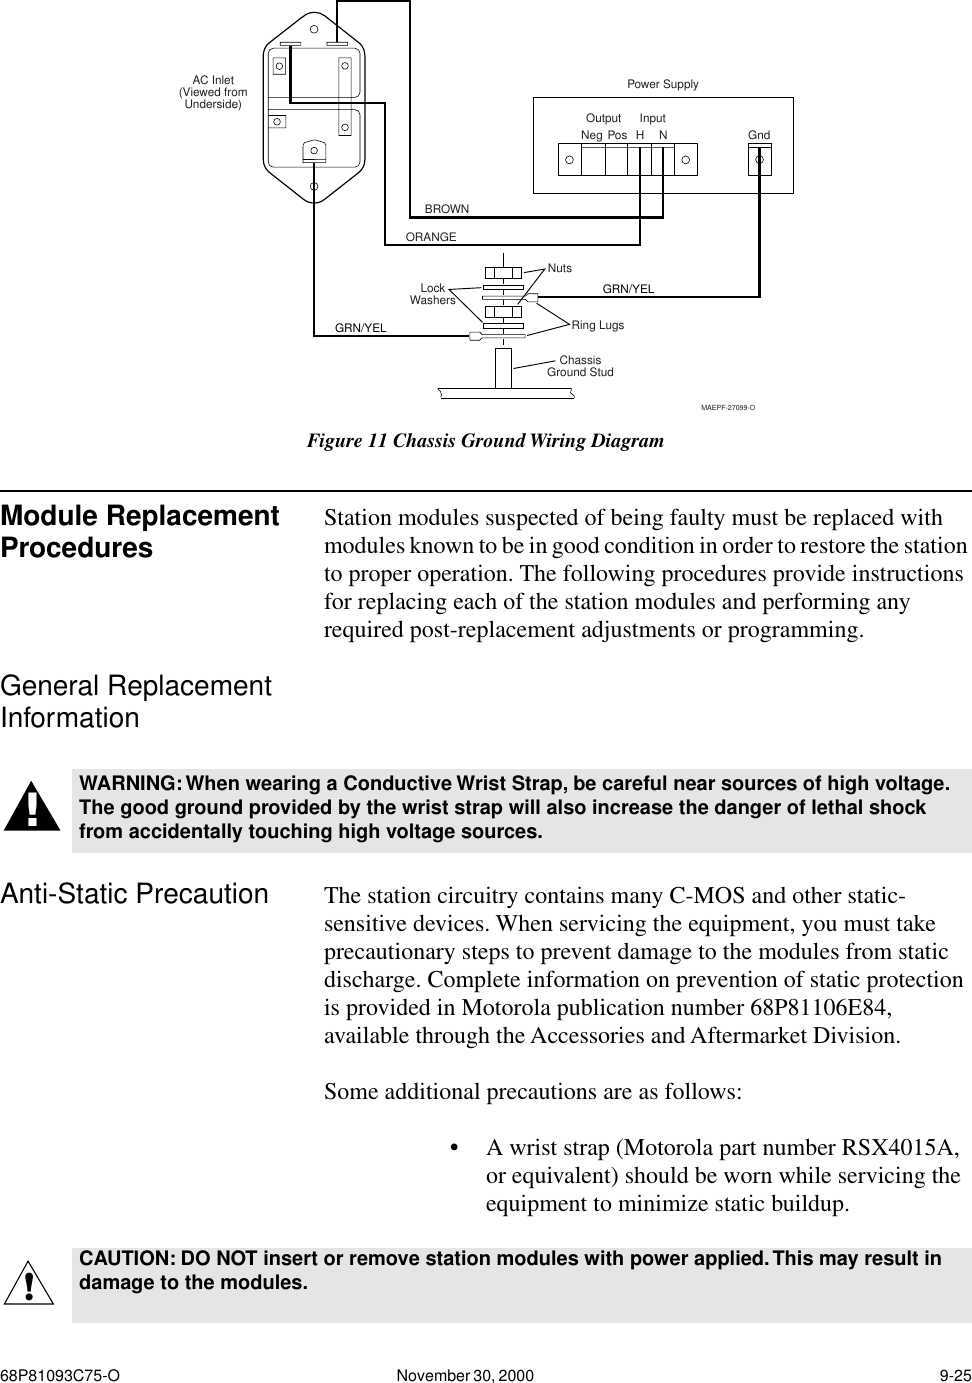 68P81093C75-O November 30, 2000  9-25Module Replacement Procedures Station modules suspected of being faulty must be replaced with modules known to be in good condition in order to restore the station to proper operation. The following procedures provide instructions for replacing each of the station modules and performing any required post-replacement adjustments or programming.General Replacement InformationAnti-Static Precaution The station circuitry contains many C-MOS and other static-sensitive devices. When servicing the equipment, you must take precautionary steps to prevent damage to the modules from static discharge. Complete information on prevention of static protection is provided in Motorola publication number 68P81106E84, available through the Accessories and Aftermarket Division. Some additional precautions are as follows:•A wrist strap (Motorola part number RSX4015A, or equivalent) should be worn while servicing the equipment to minimize static buildup.Figure 11 Chassis Ground Wiring DiagramOutput InputGndNeg Pos HNPower SupplyAC Inlet(Viewed fromUnderside)ChassisGround StudRing LugsNutsLockWashers GRN/YELGRN/YELBROWNORANGEMAEPF-27099-OWARNING: When wearing a Conductive Wrist Strap, be careful near sources of high voltage. The good ground provided by the wrist strap will also increase the danger of lethal shock from accidentally touching high voltage sources.!CAUTION: DO NOT insert or remove station modules with power applied. This may result in damage to the modules.!